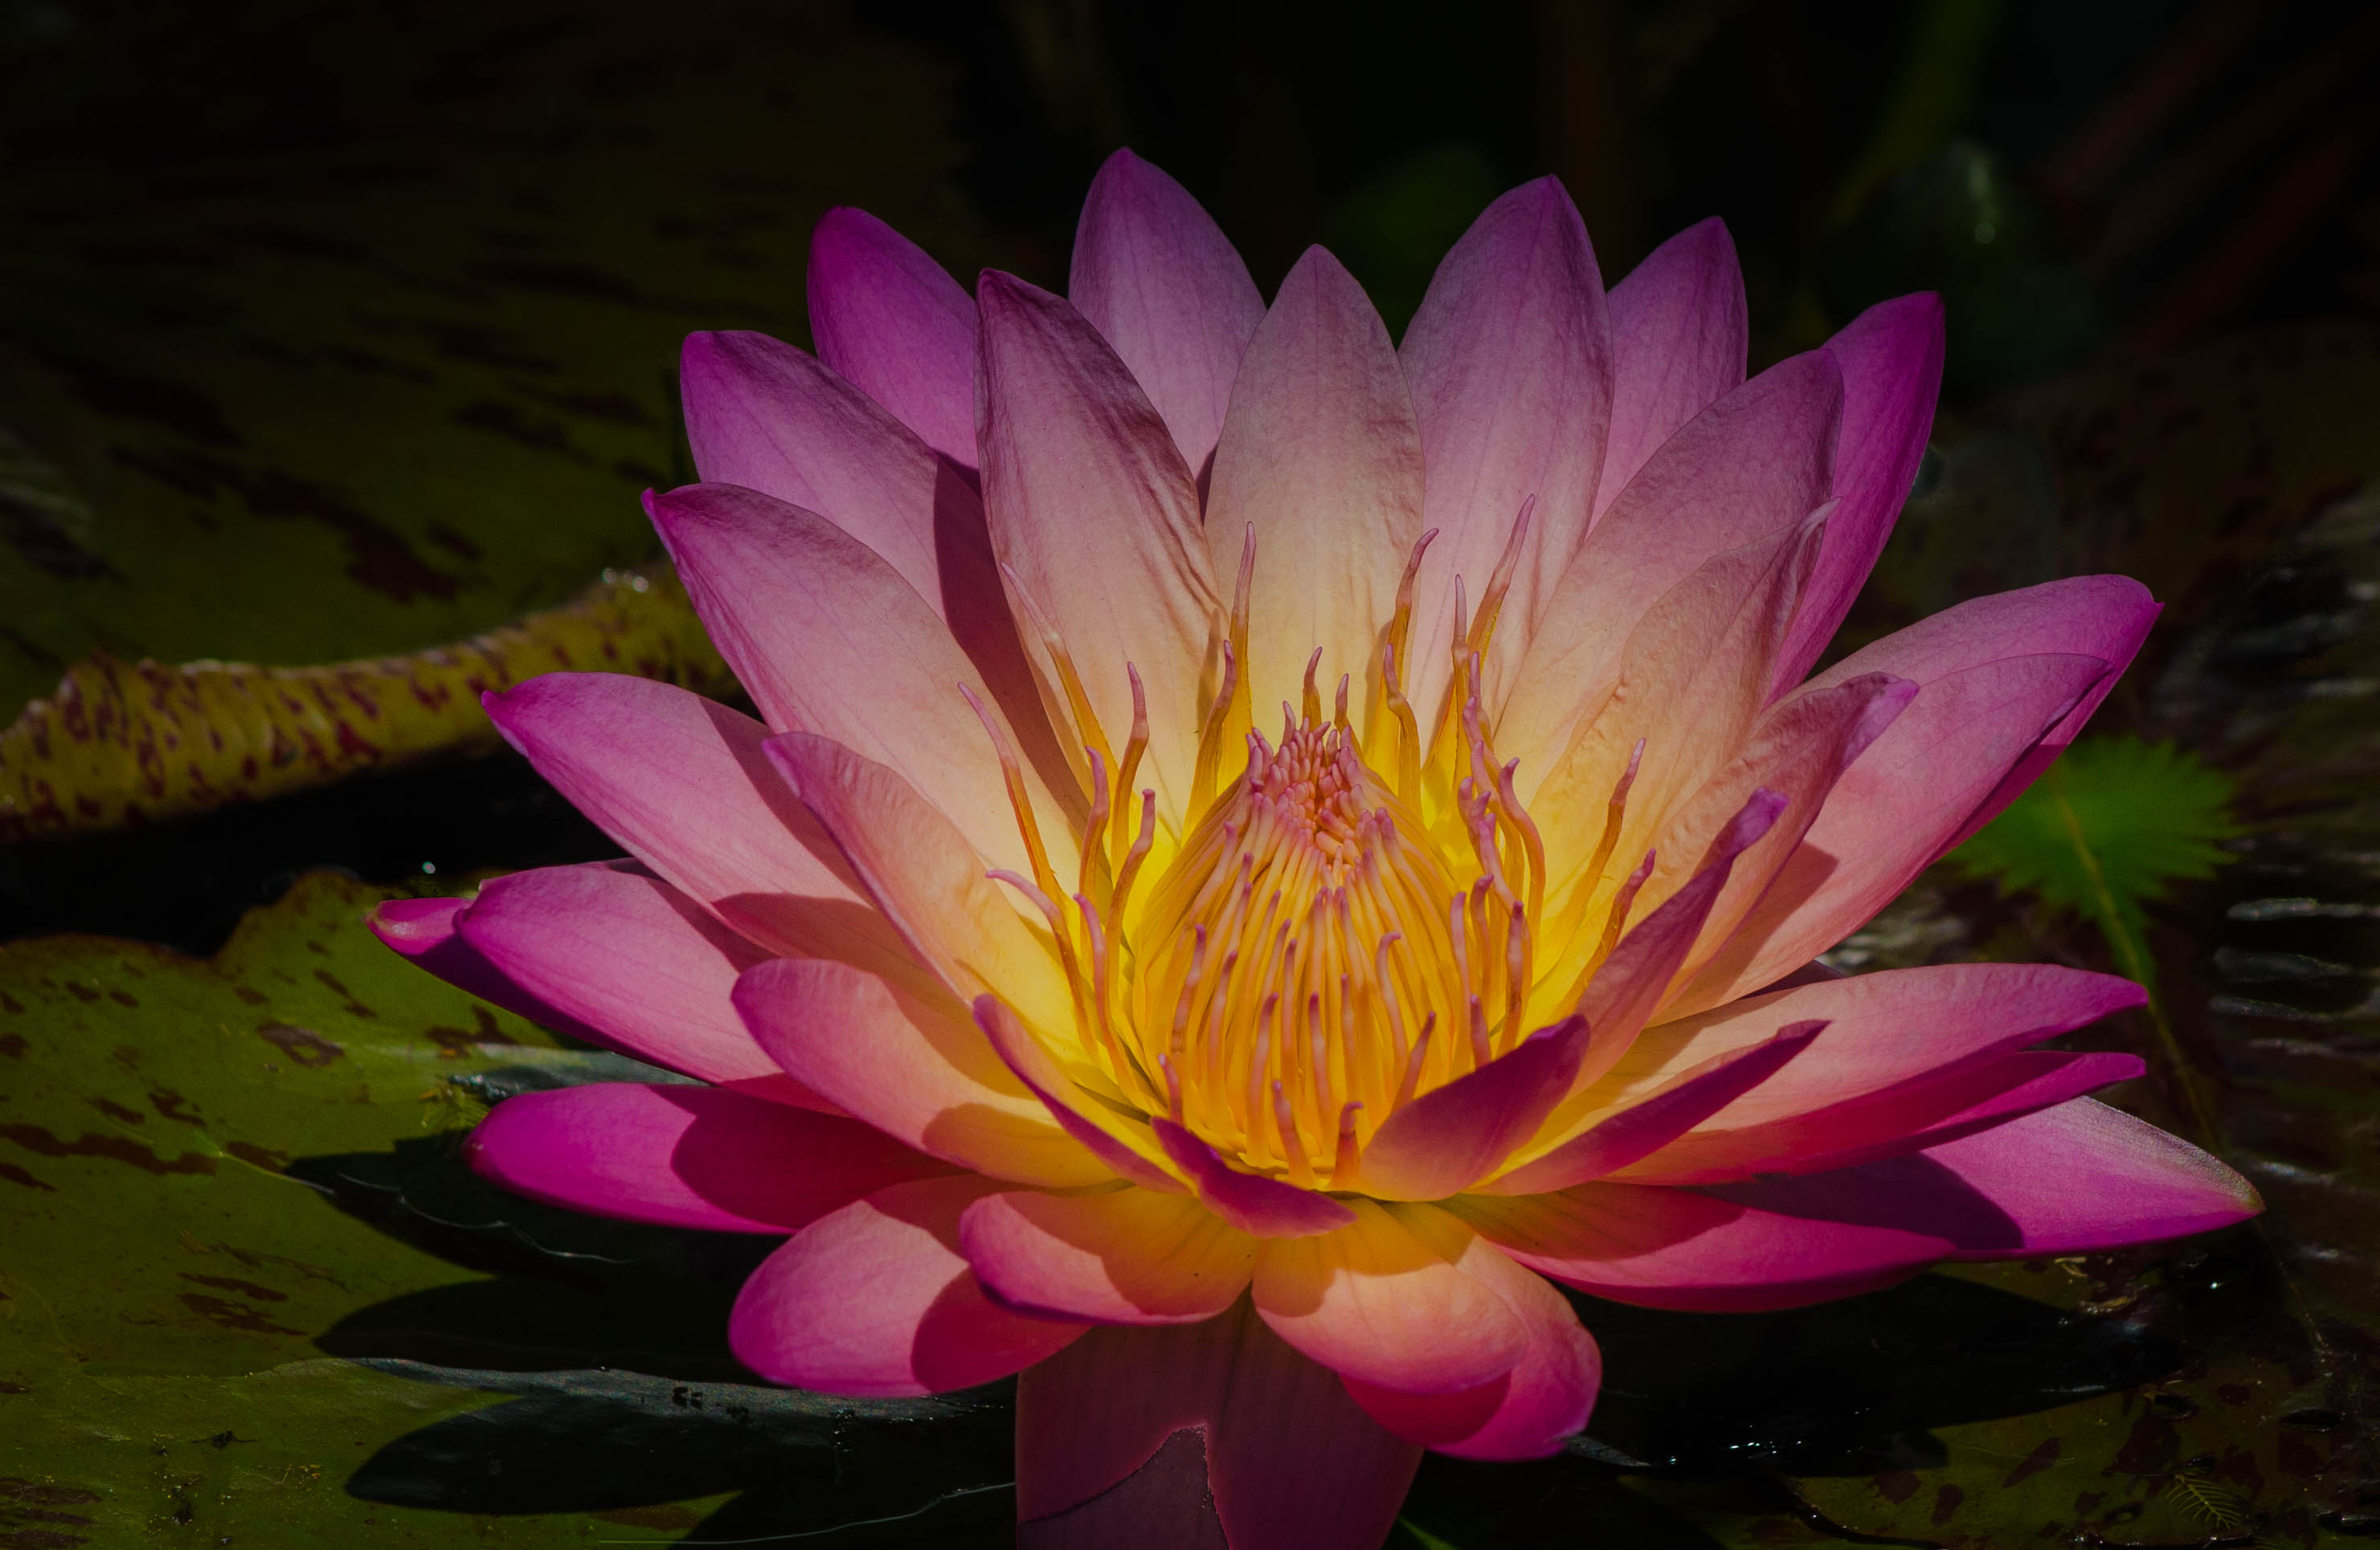 Earth Flower Lily Pad Pink Flower Water Lily 2962x1929